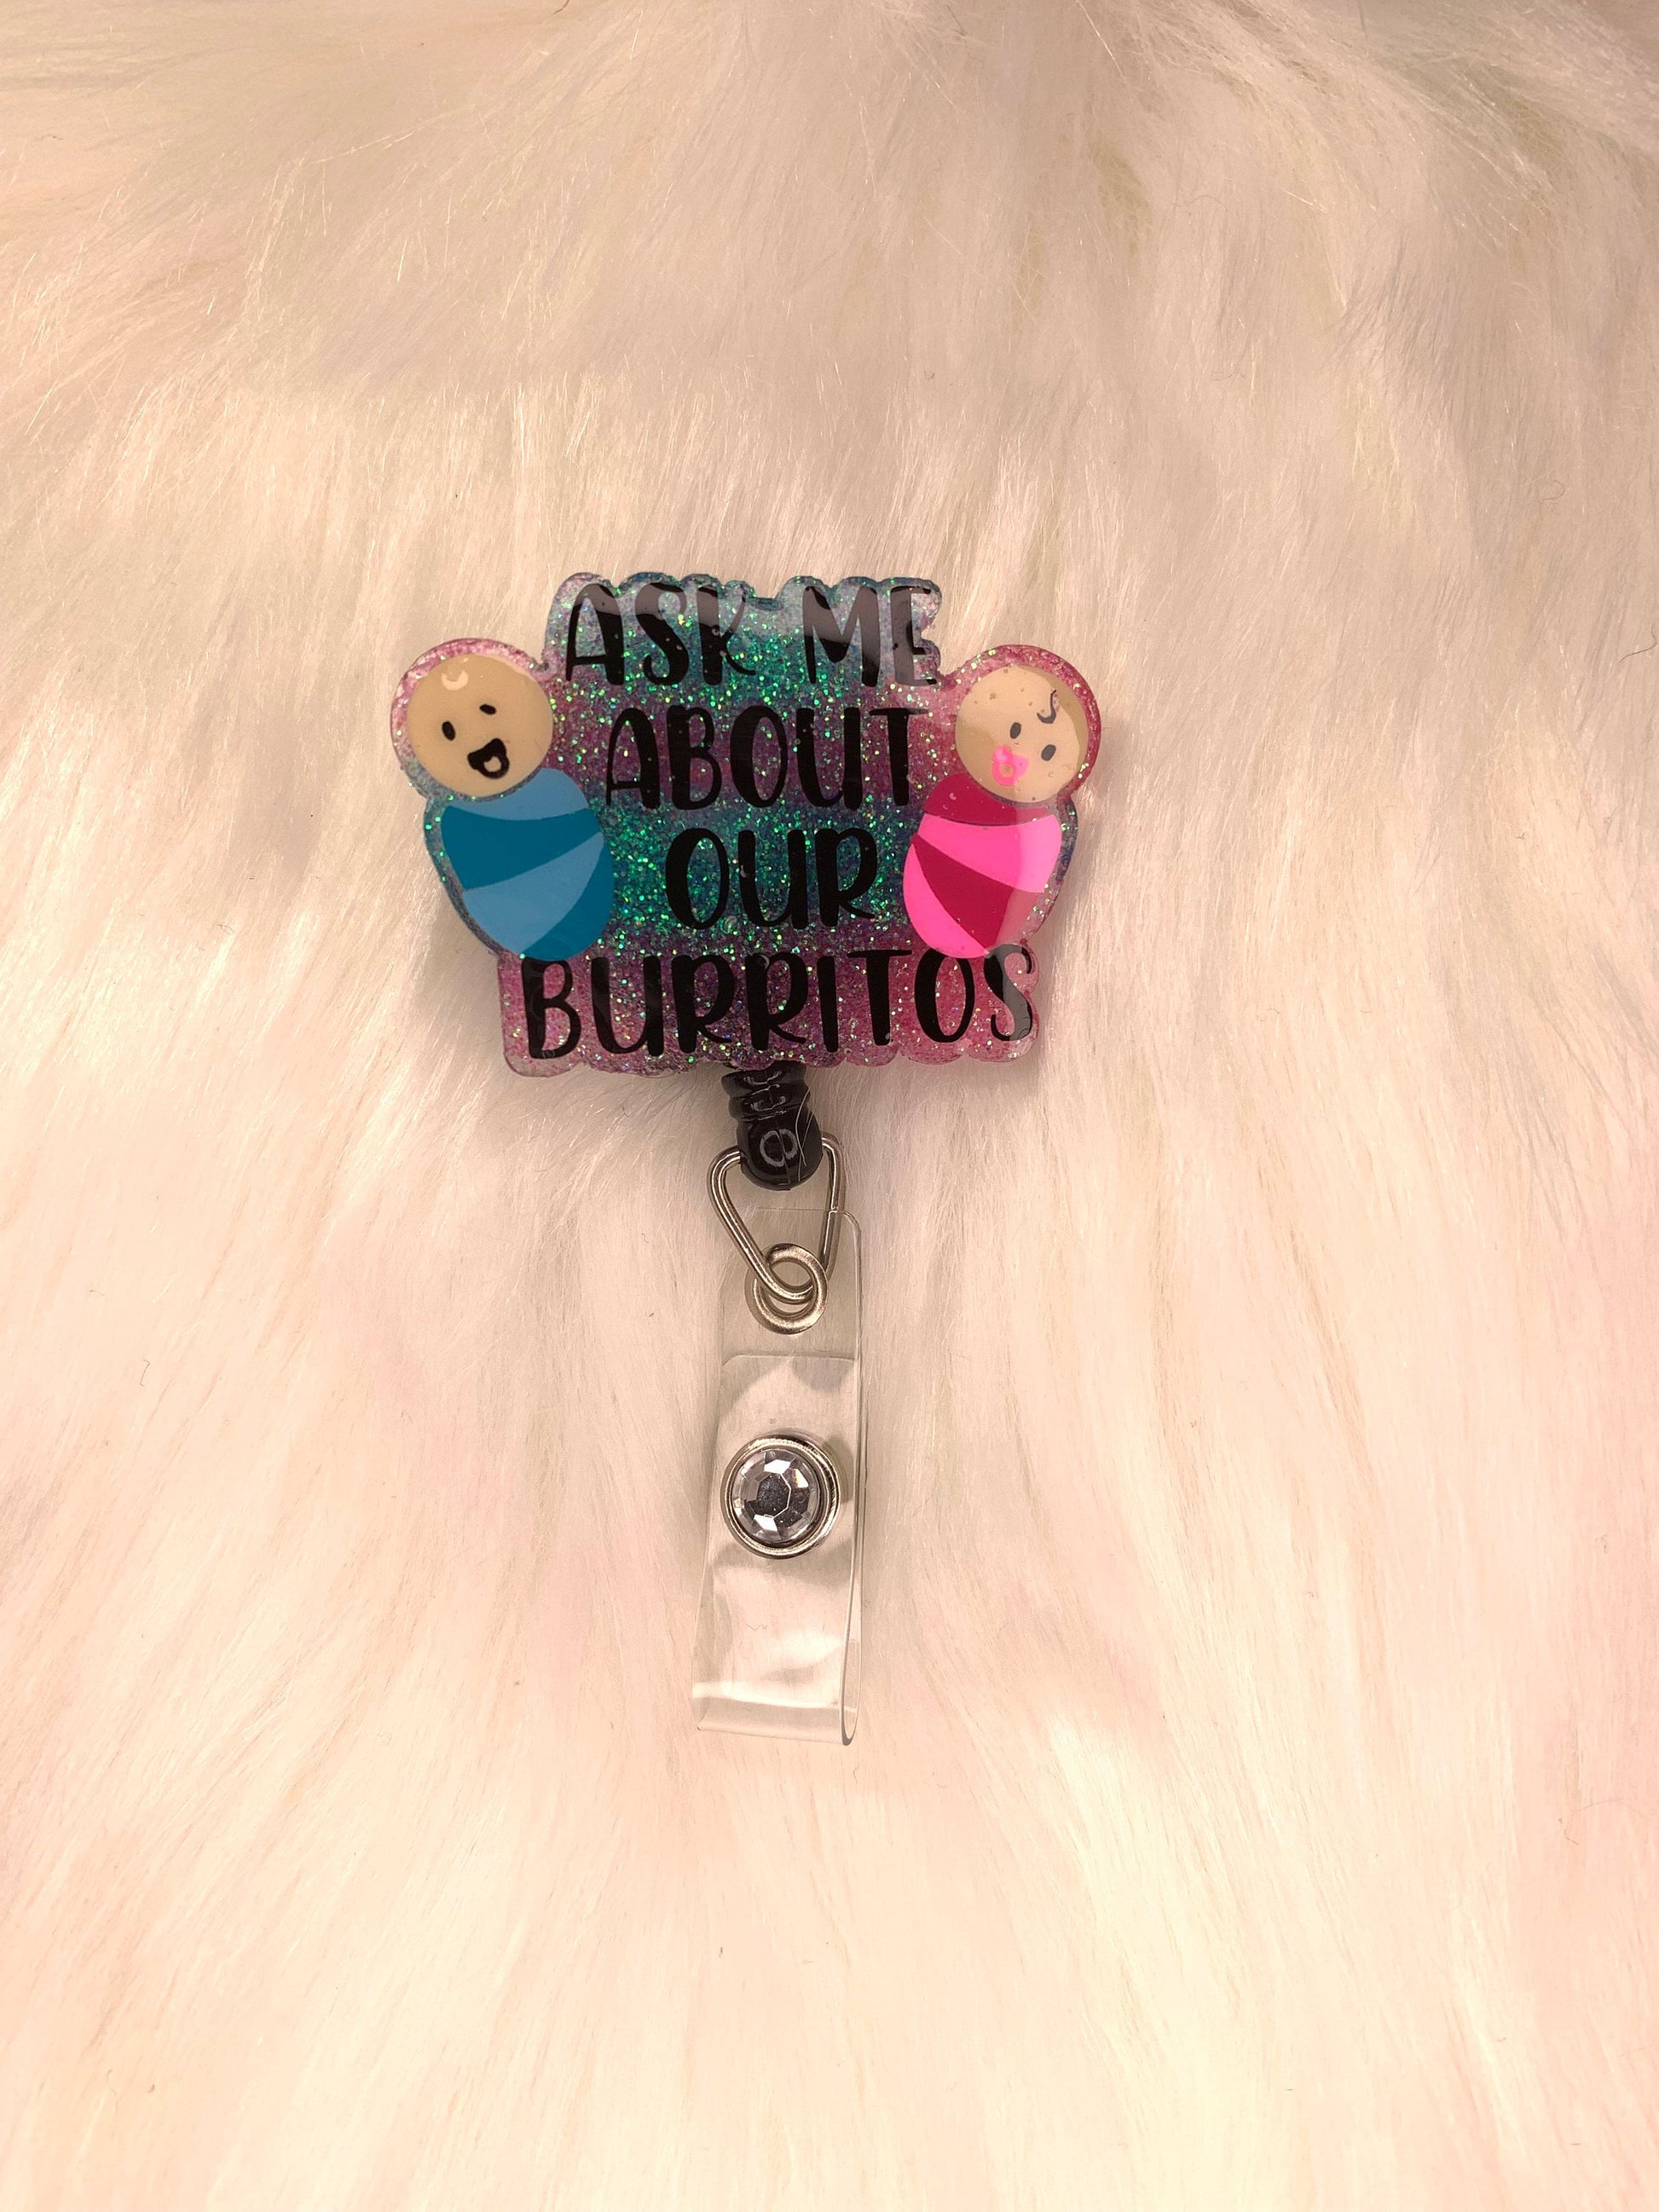 Ask me about our burritos badge reel-Medical-Badge Reel-Funny Badge Reel- Labor and Delivery, NICU-Pediatric